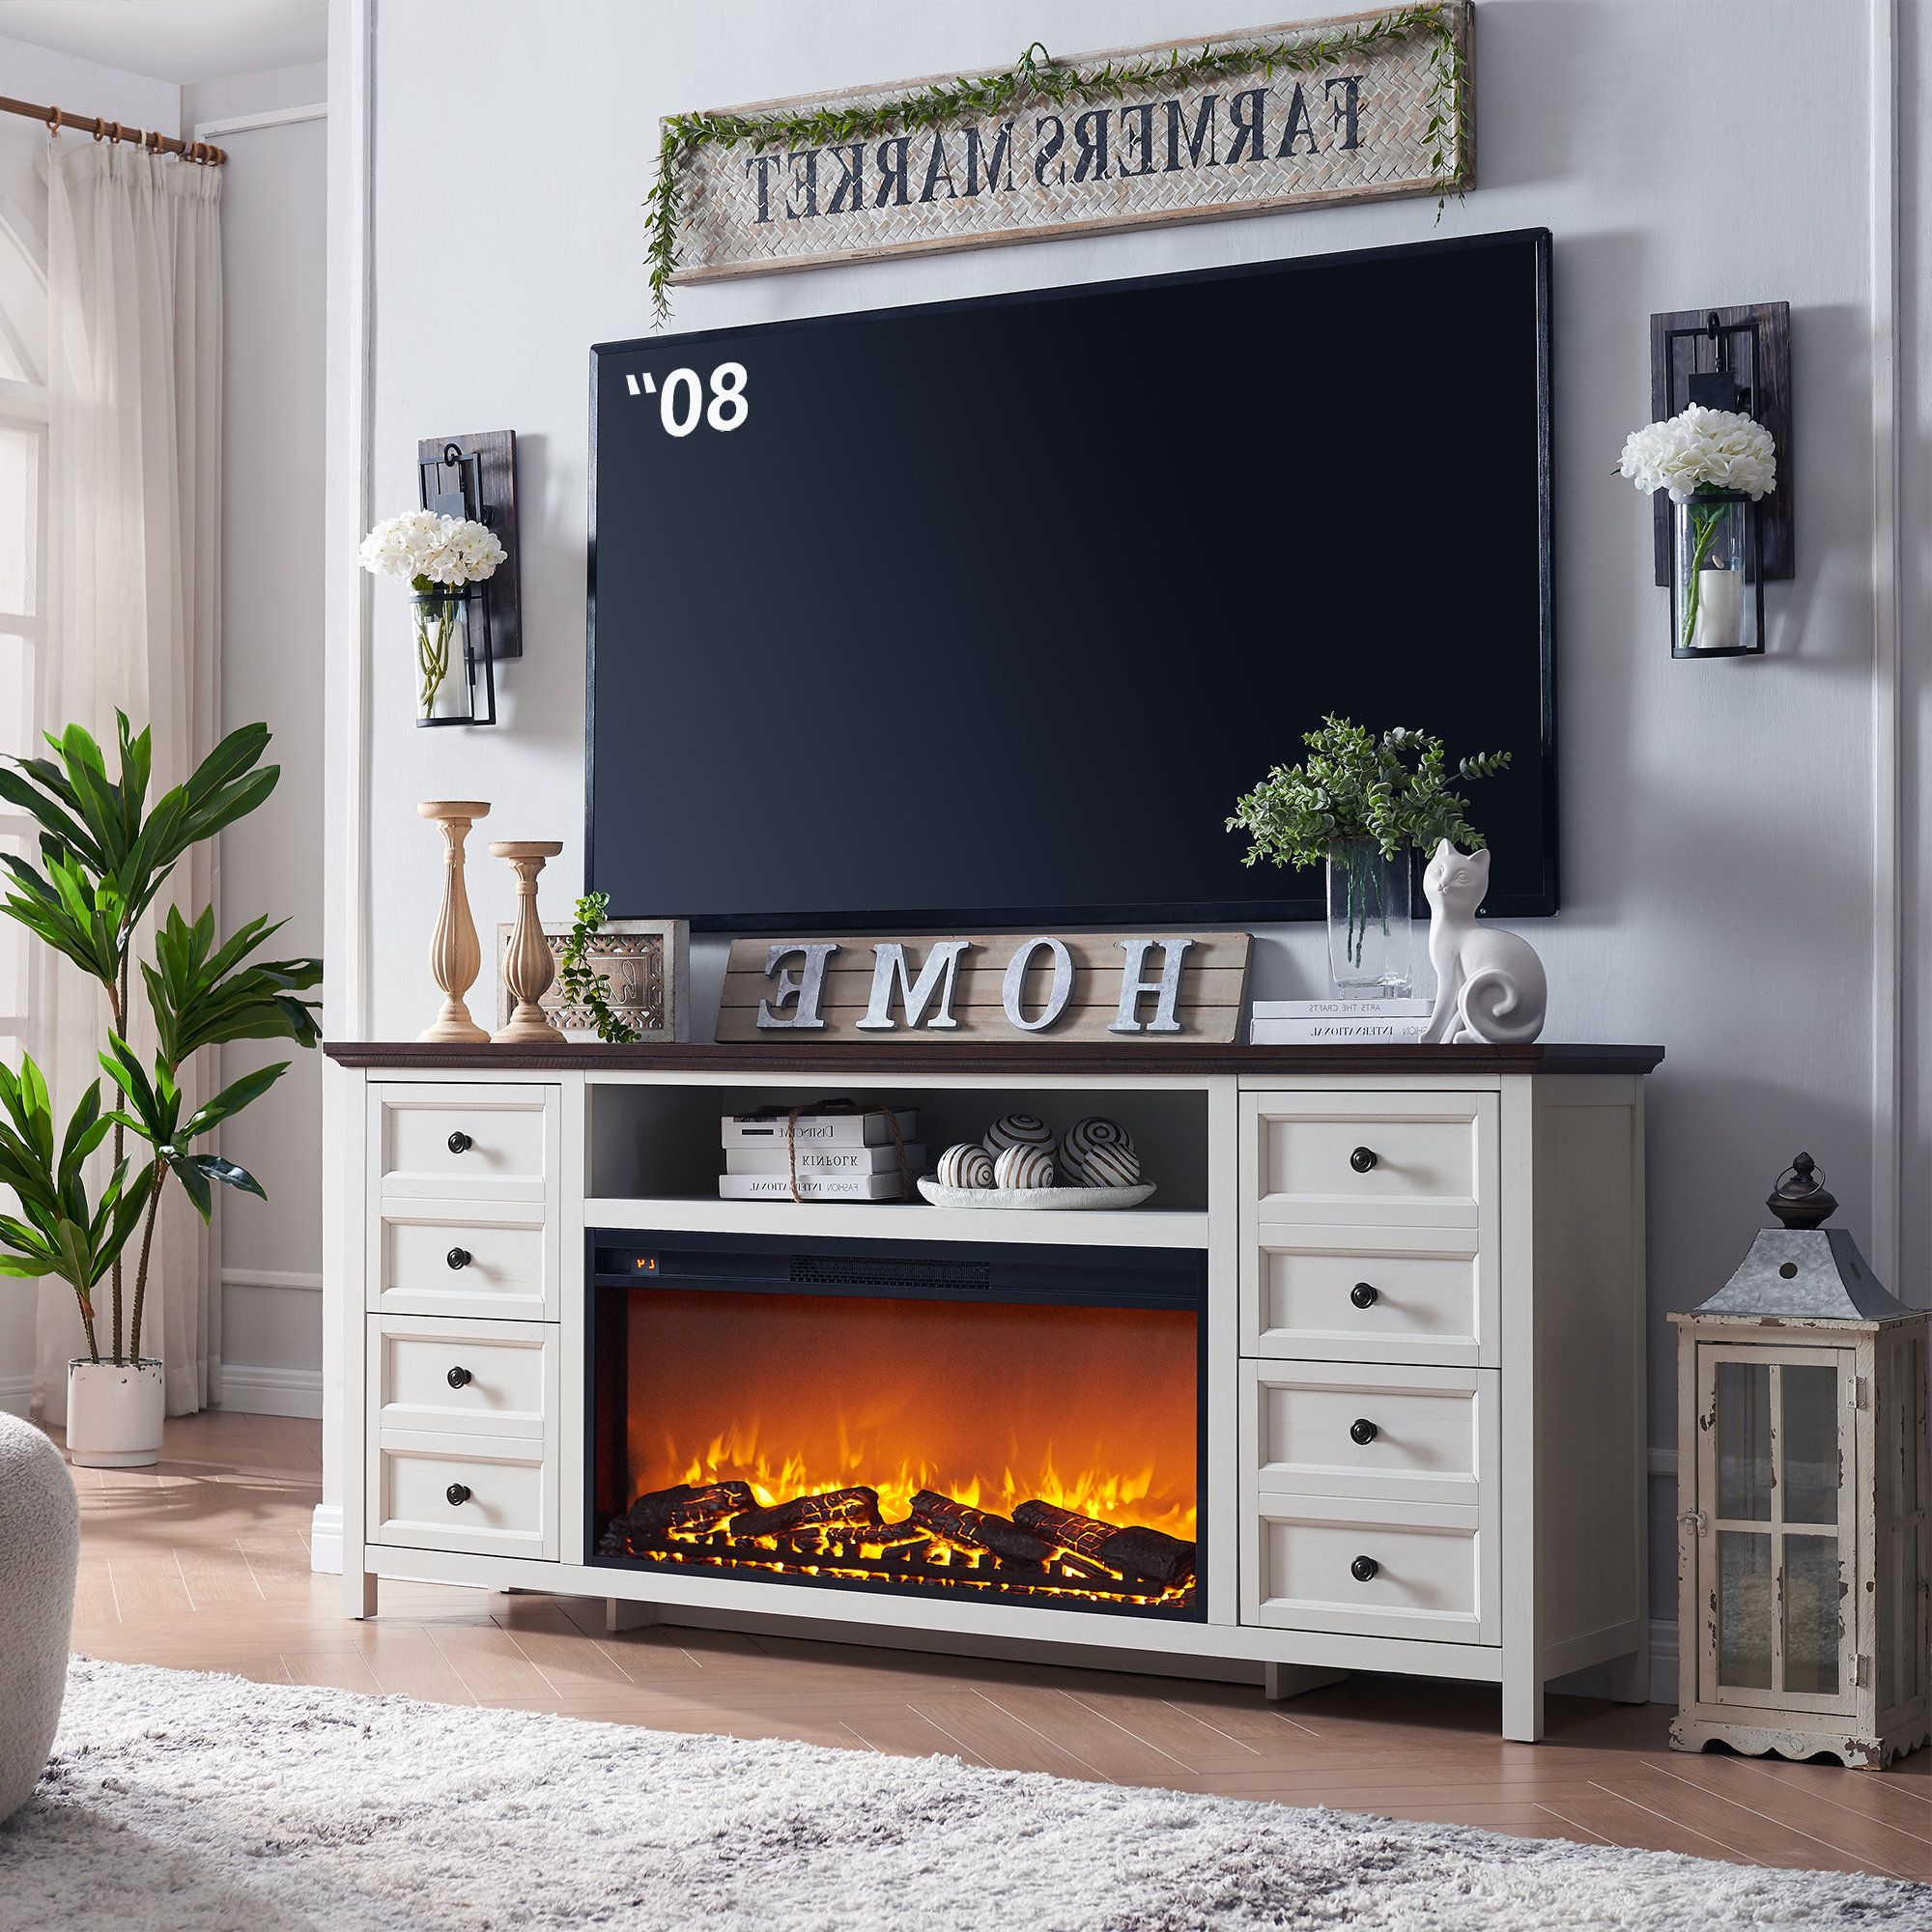 Red Barrel Studio® Conogher Tv Stand For Tvs Up To 80" With Electric  Fireplace Included & Reviews | Wayfair With Regard To Tv Stands With Electric Fireplace (Gallery 16 of 20)